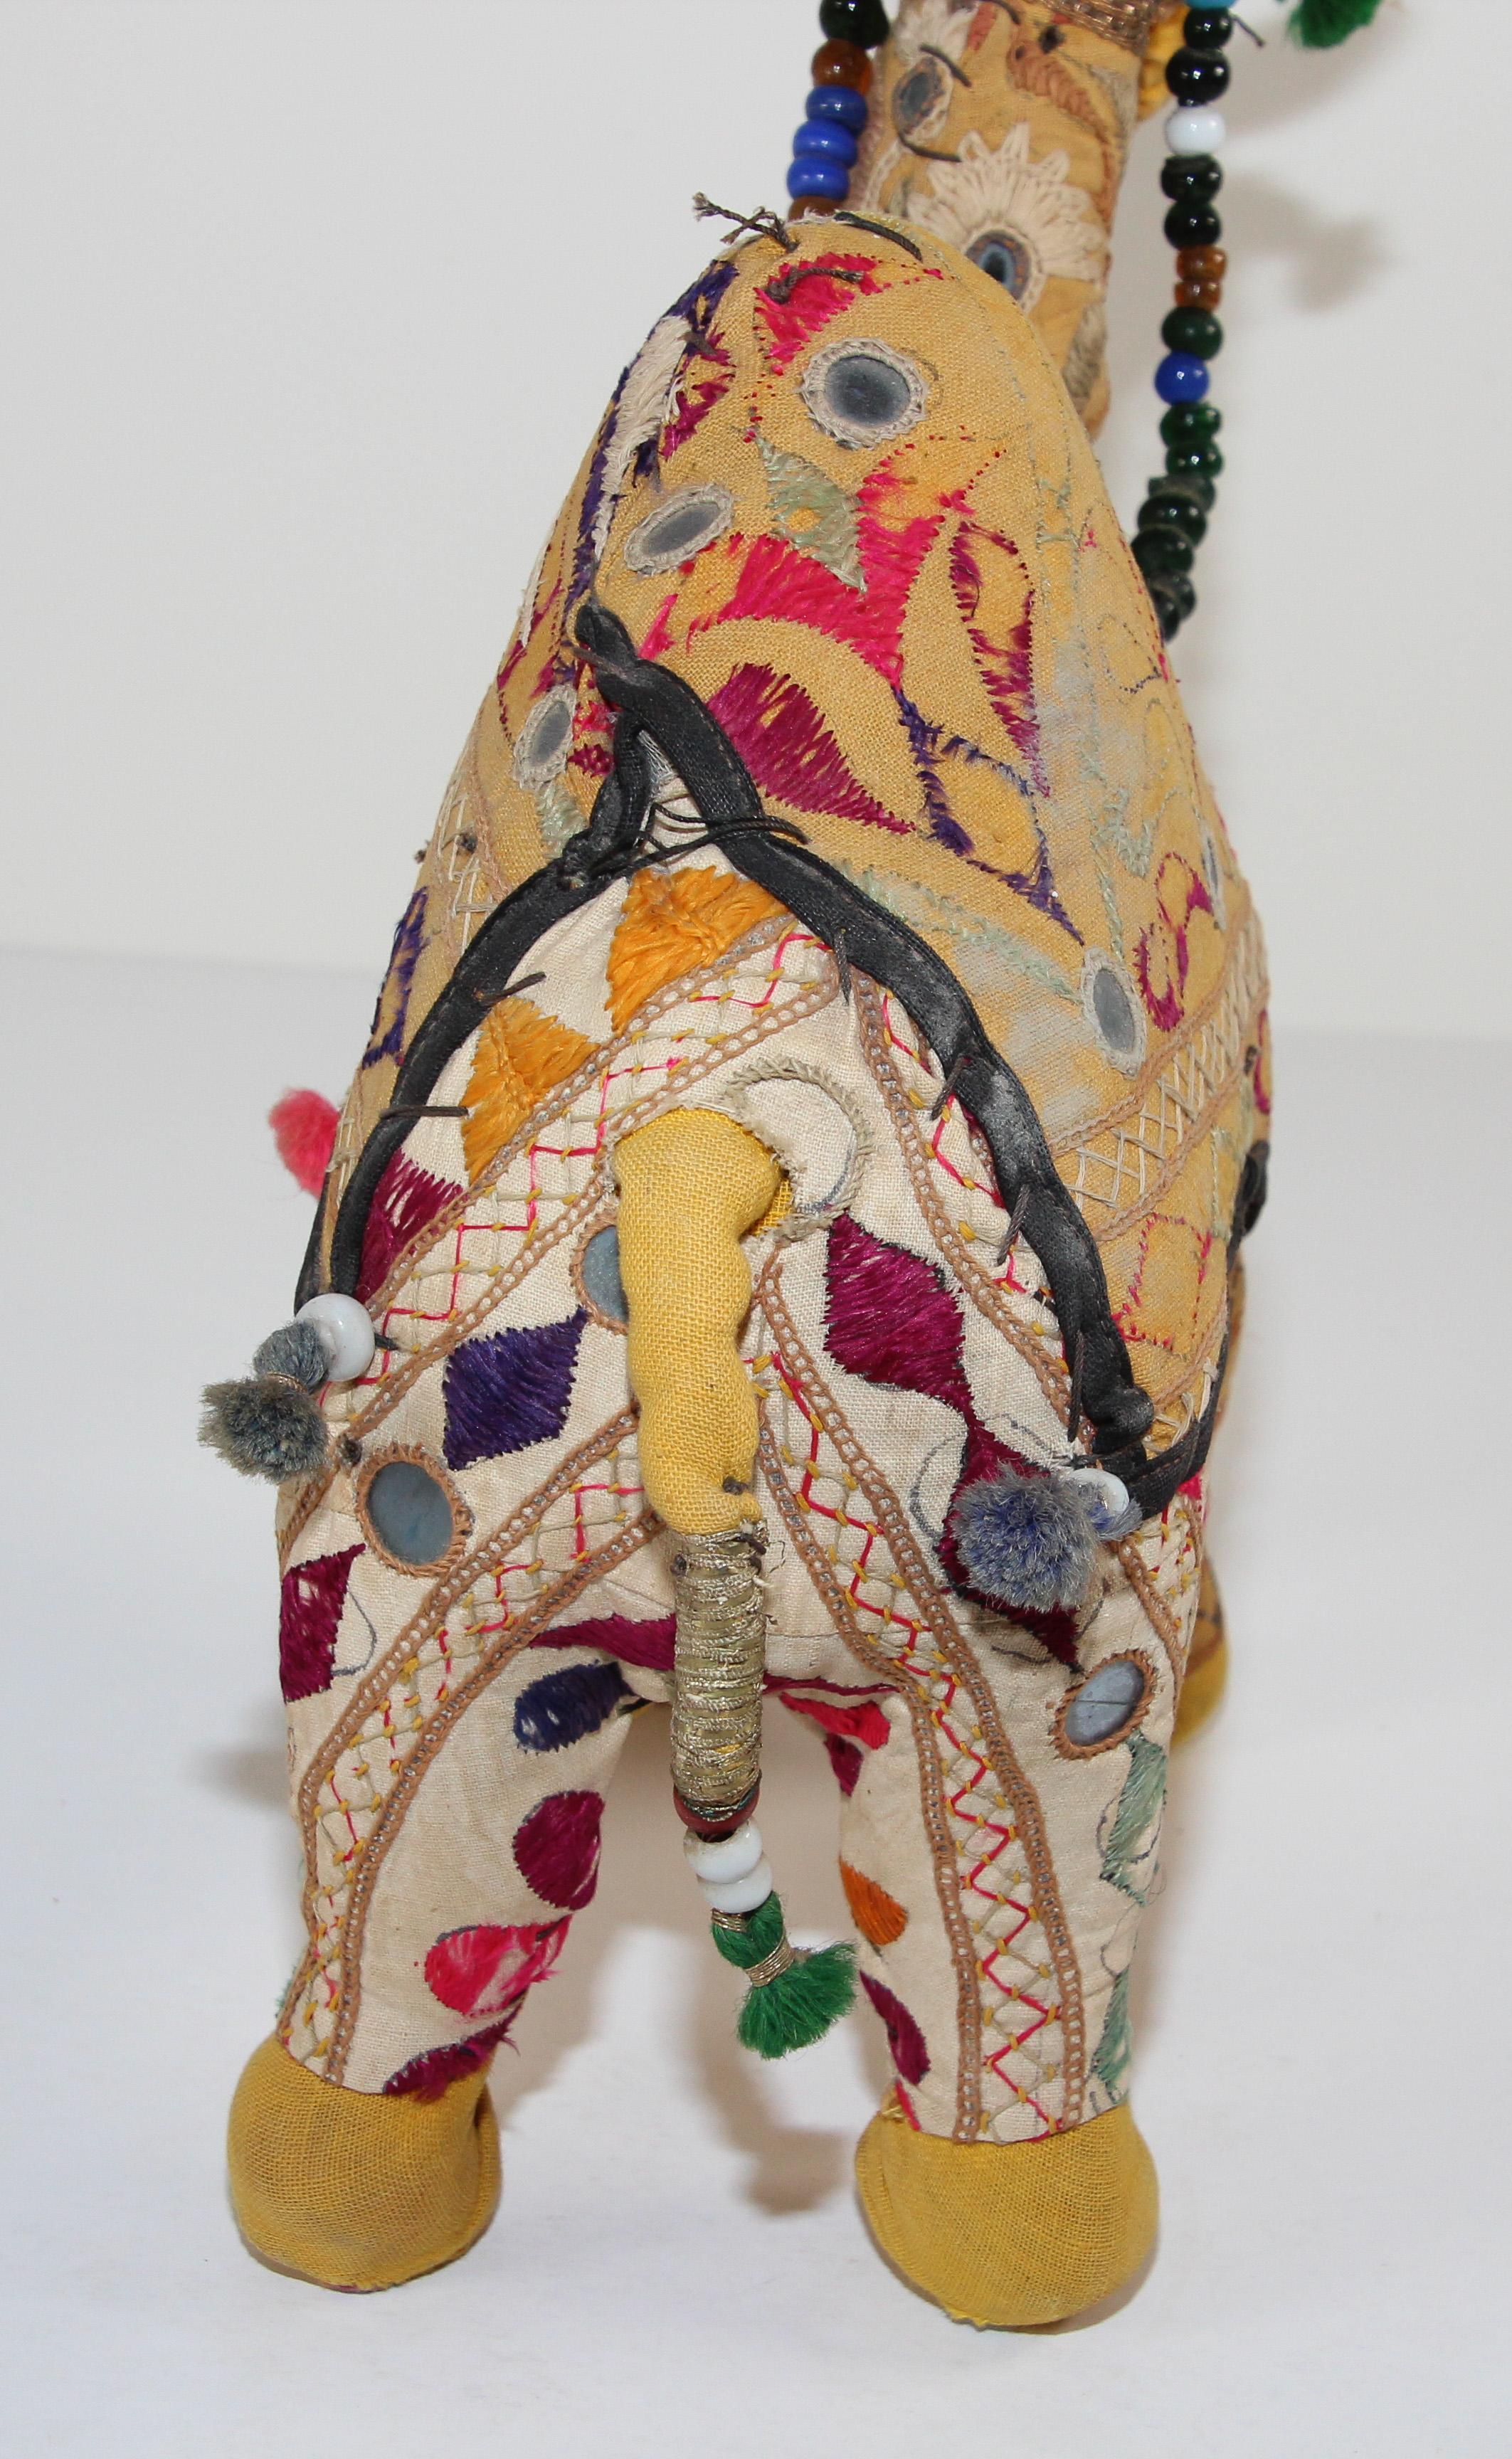 Hand-Crafted Handcrafted Vintage Stuffed Raj Cotton Embroidered Camel Toy, India, 1950 For Sale